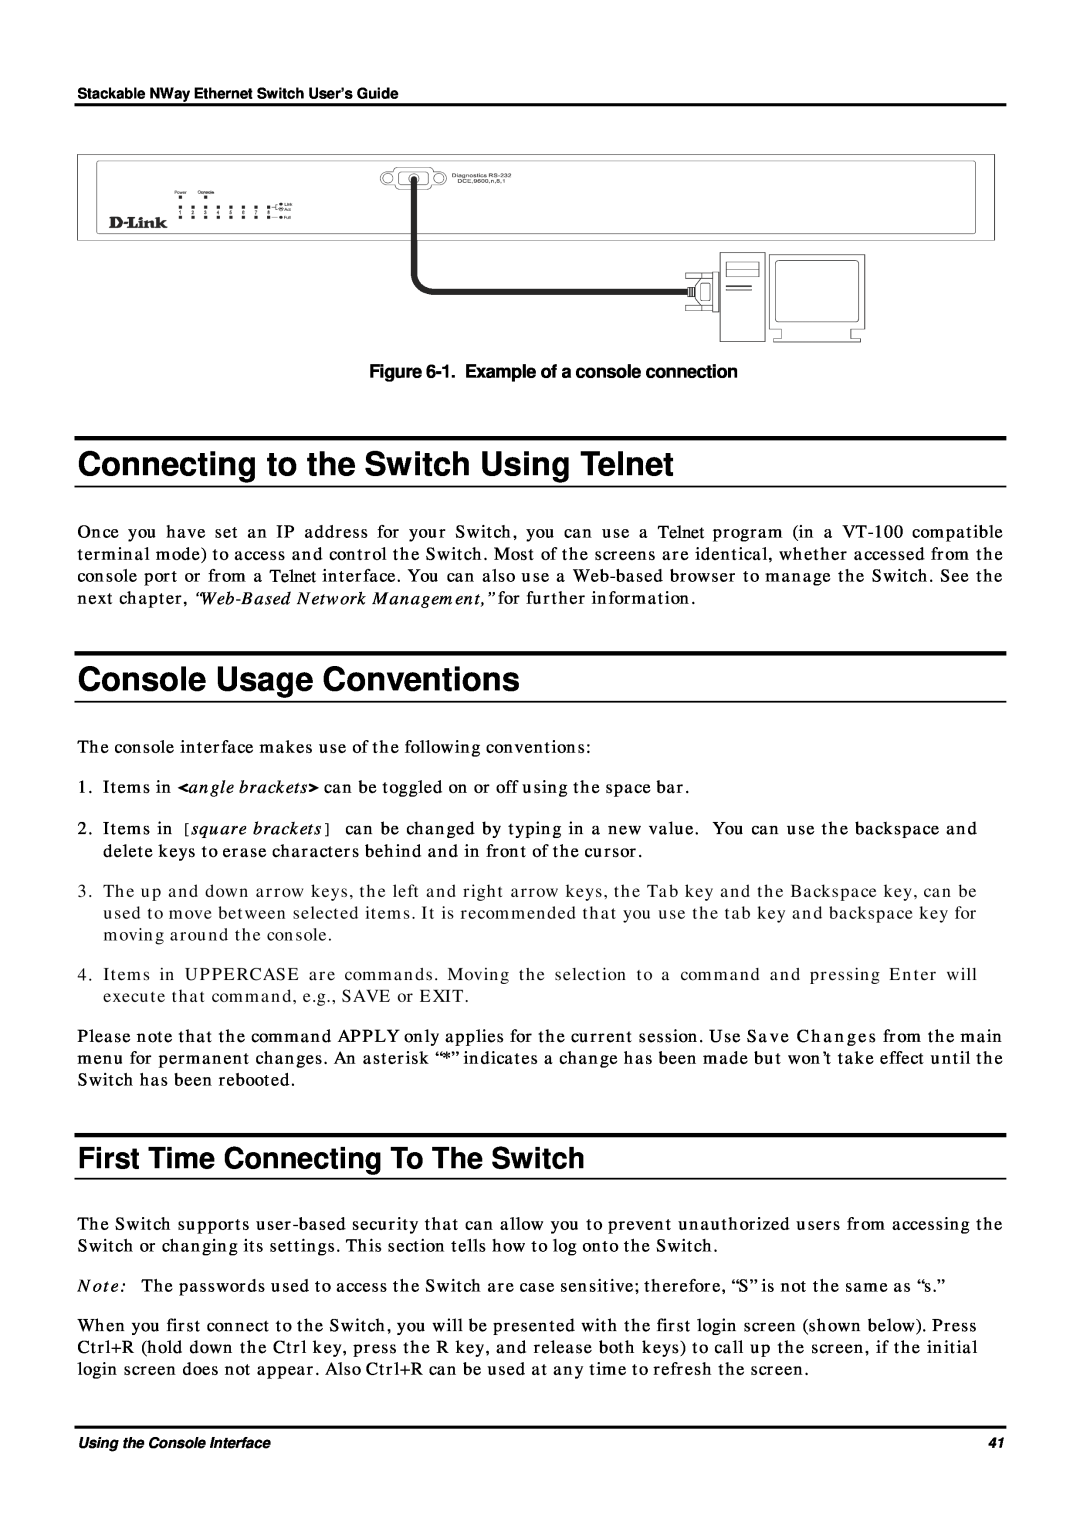 D-Link DES-3624 manual Connecting to the Switch Using Telnet, Console Usage Conventions, 1. Example of a console connection 